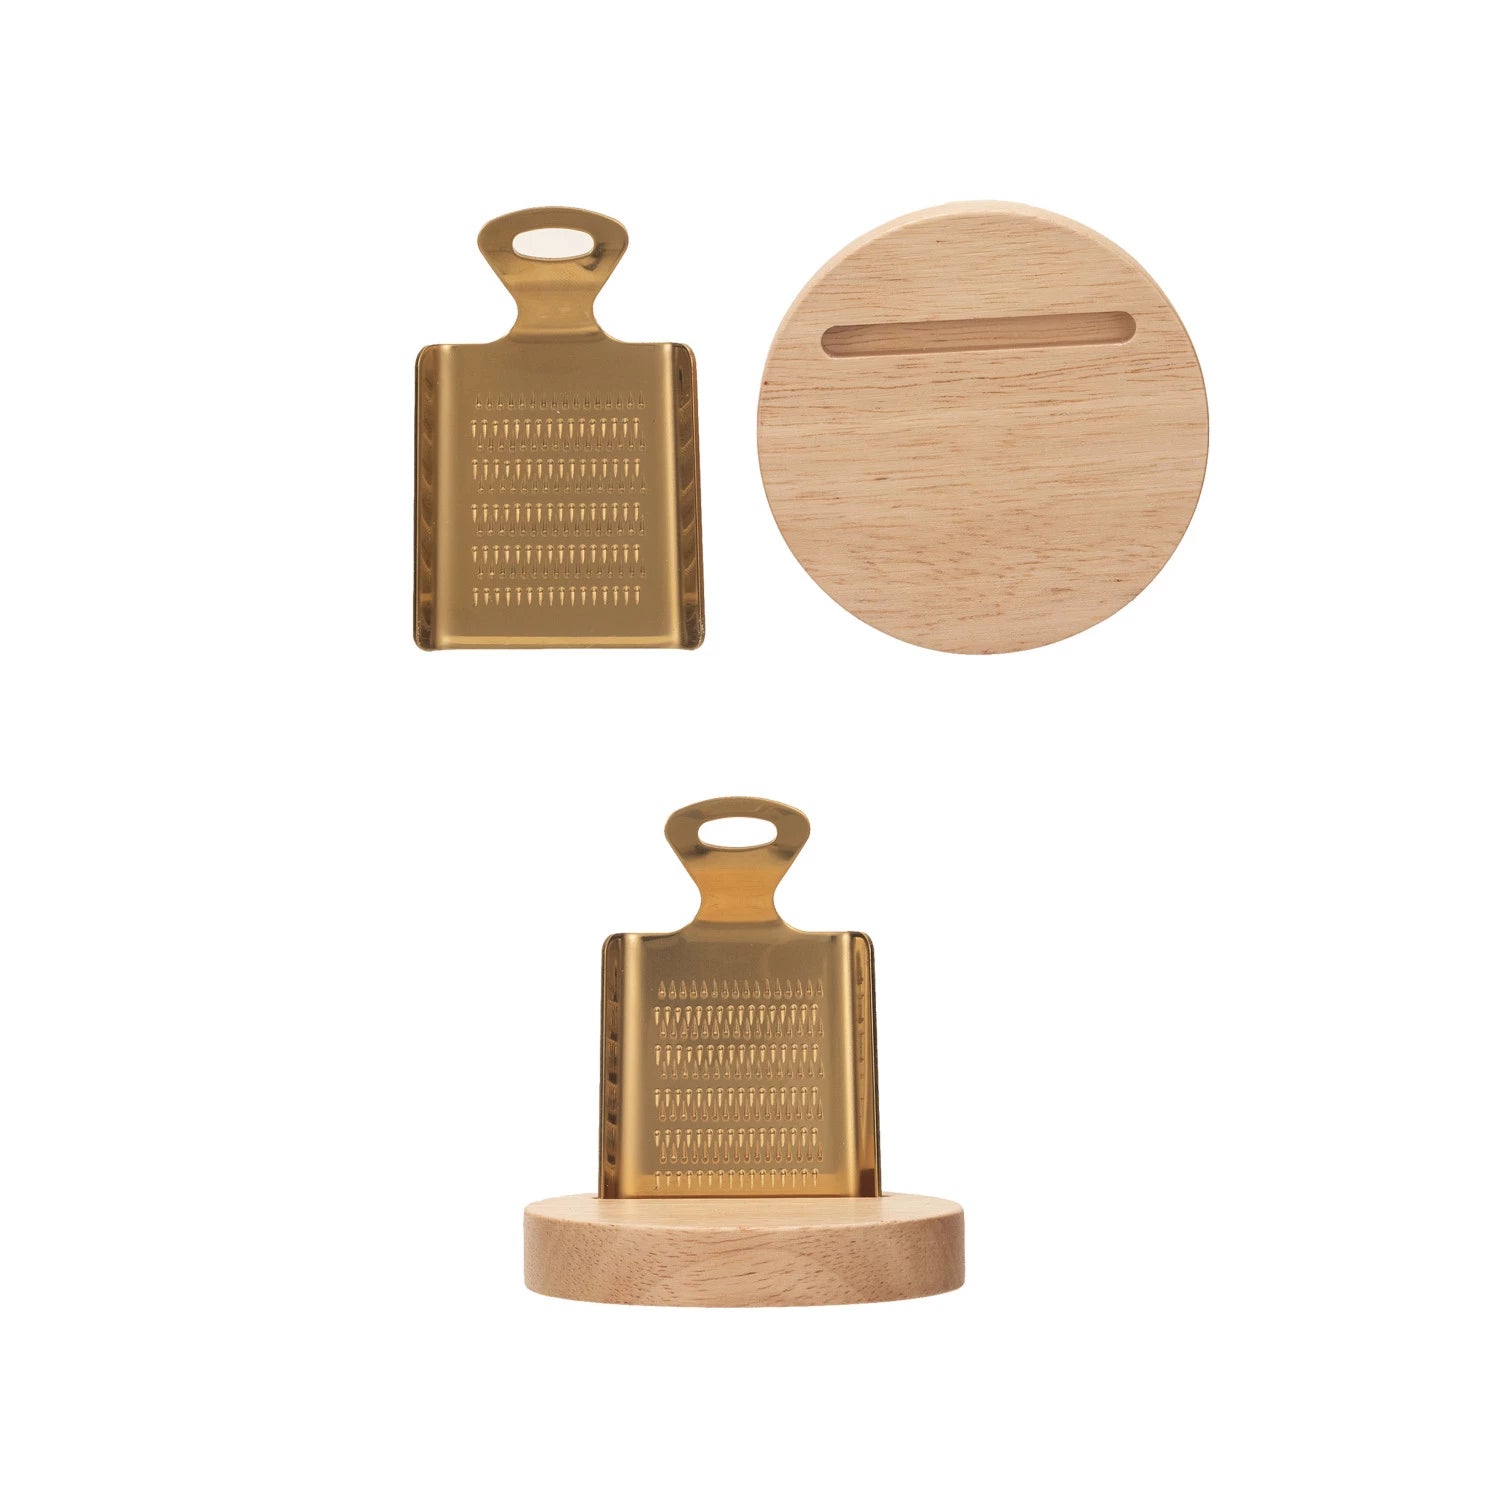 Gold Stainless steel grater with rubberwood base. Perfect for charcuterie board cheeses, lemons, and garlic. Elevated kitchen utensils. 